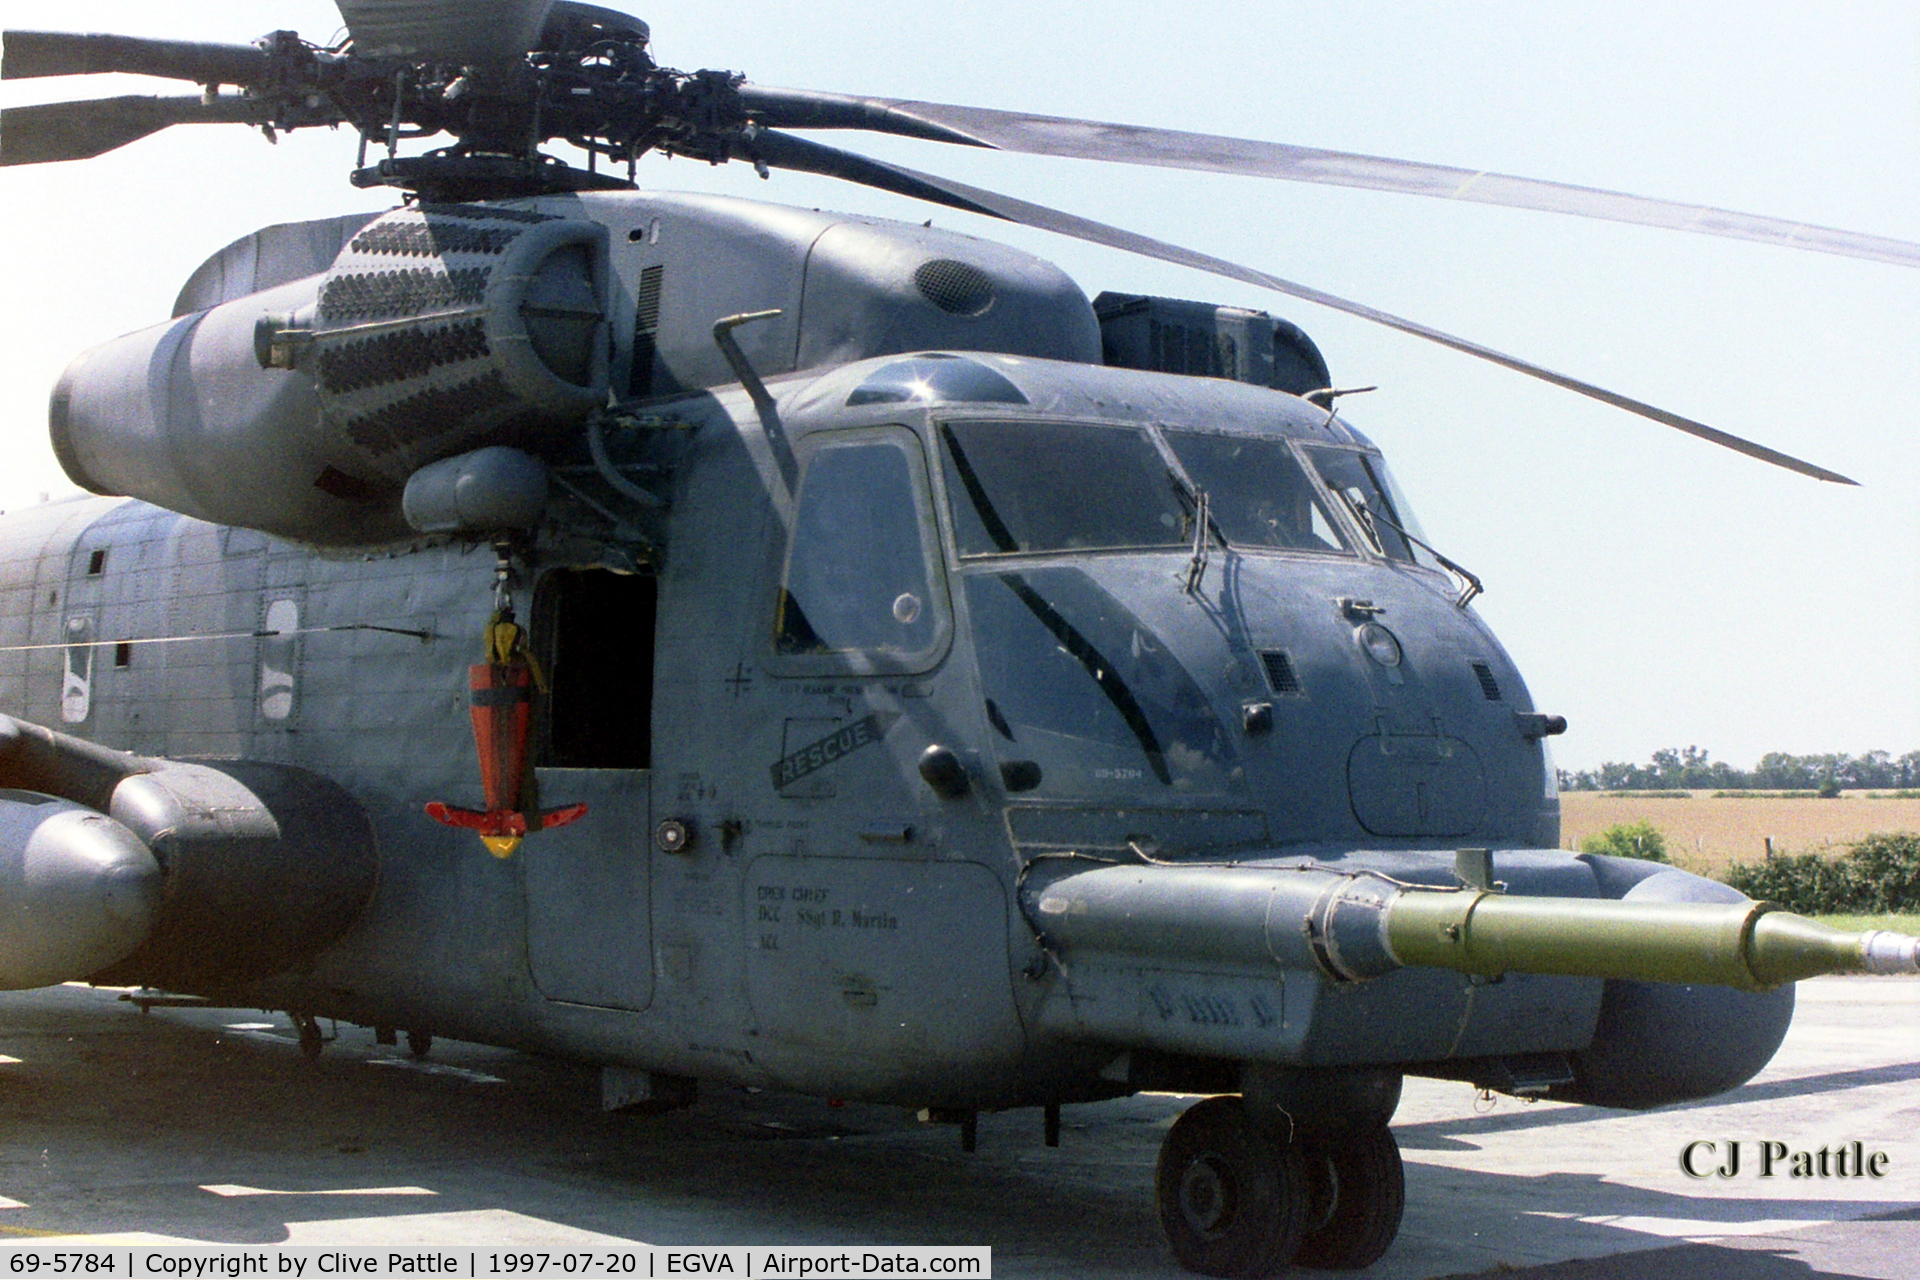 69-5784, 1969 Sikorsky MH-53J Pave Low III C/N 65-232, Pictured at RIAT RAF Fairford EGVA 1997 whilst serving with USAF 352nd SOG/21st SOS from RAF Mildenhall